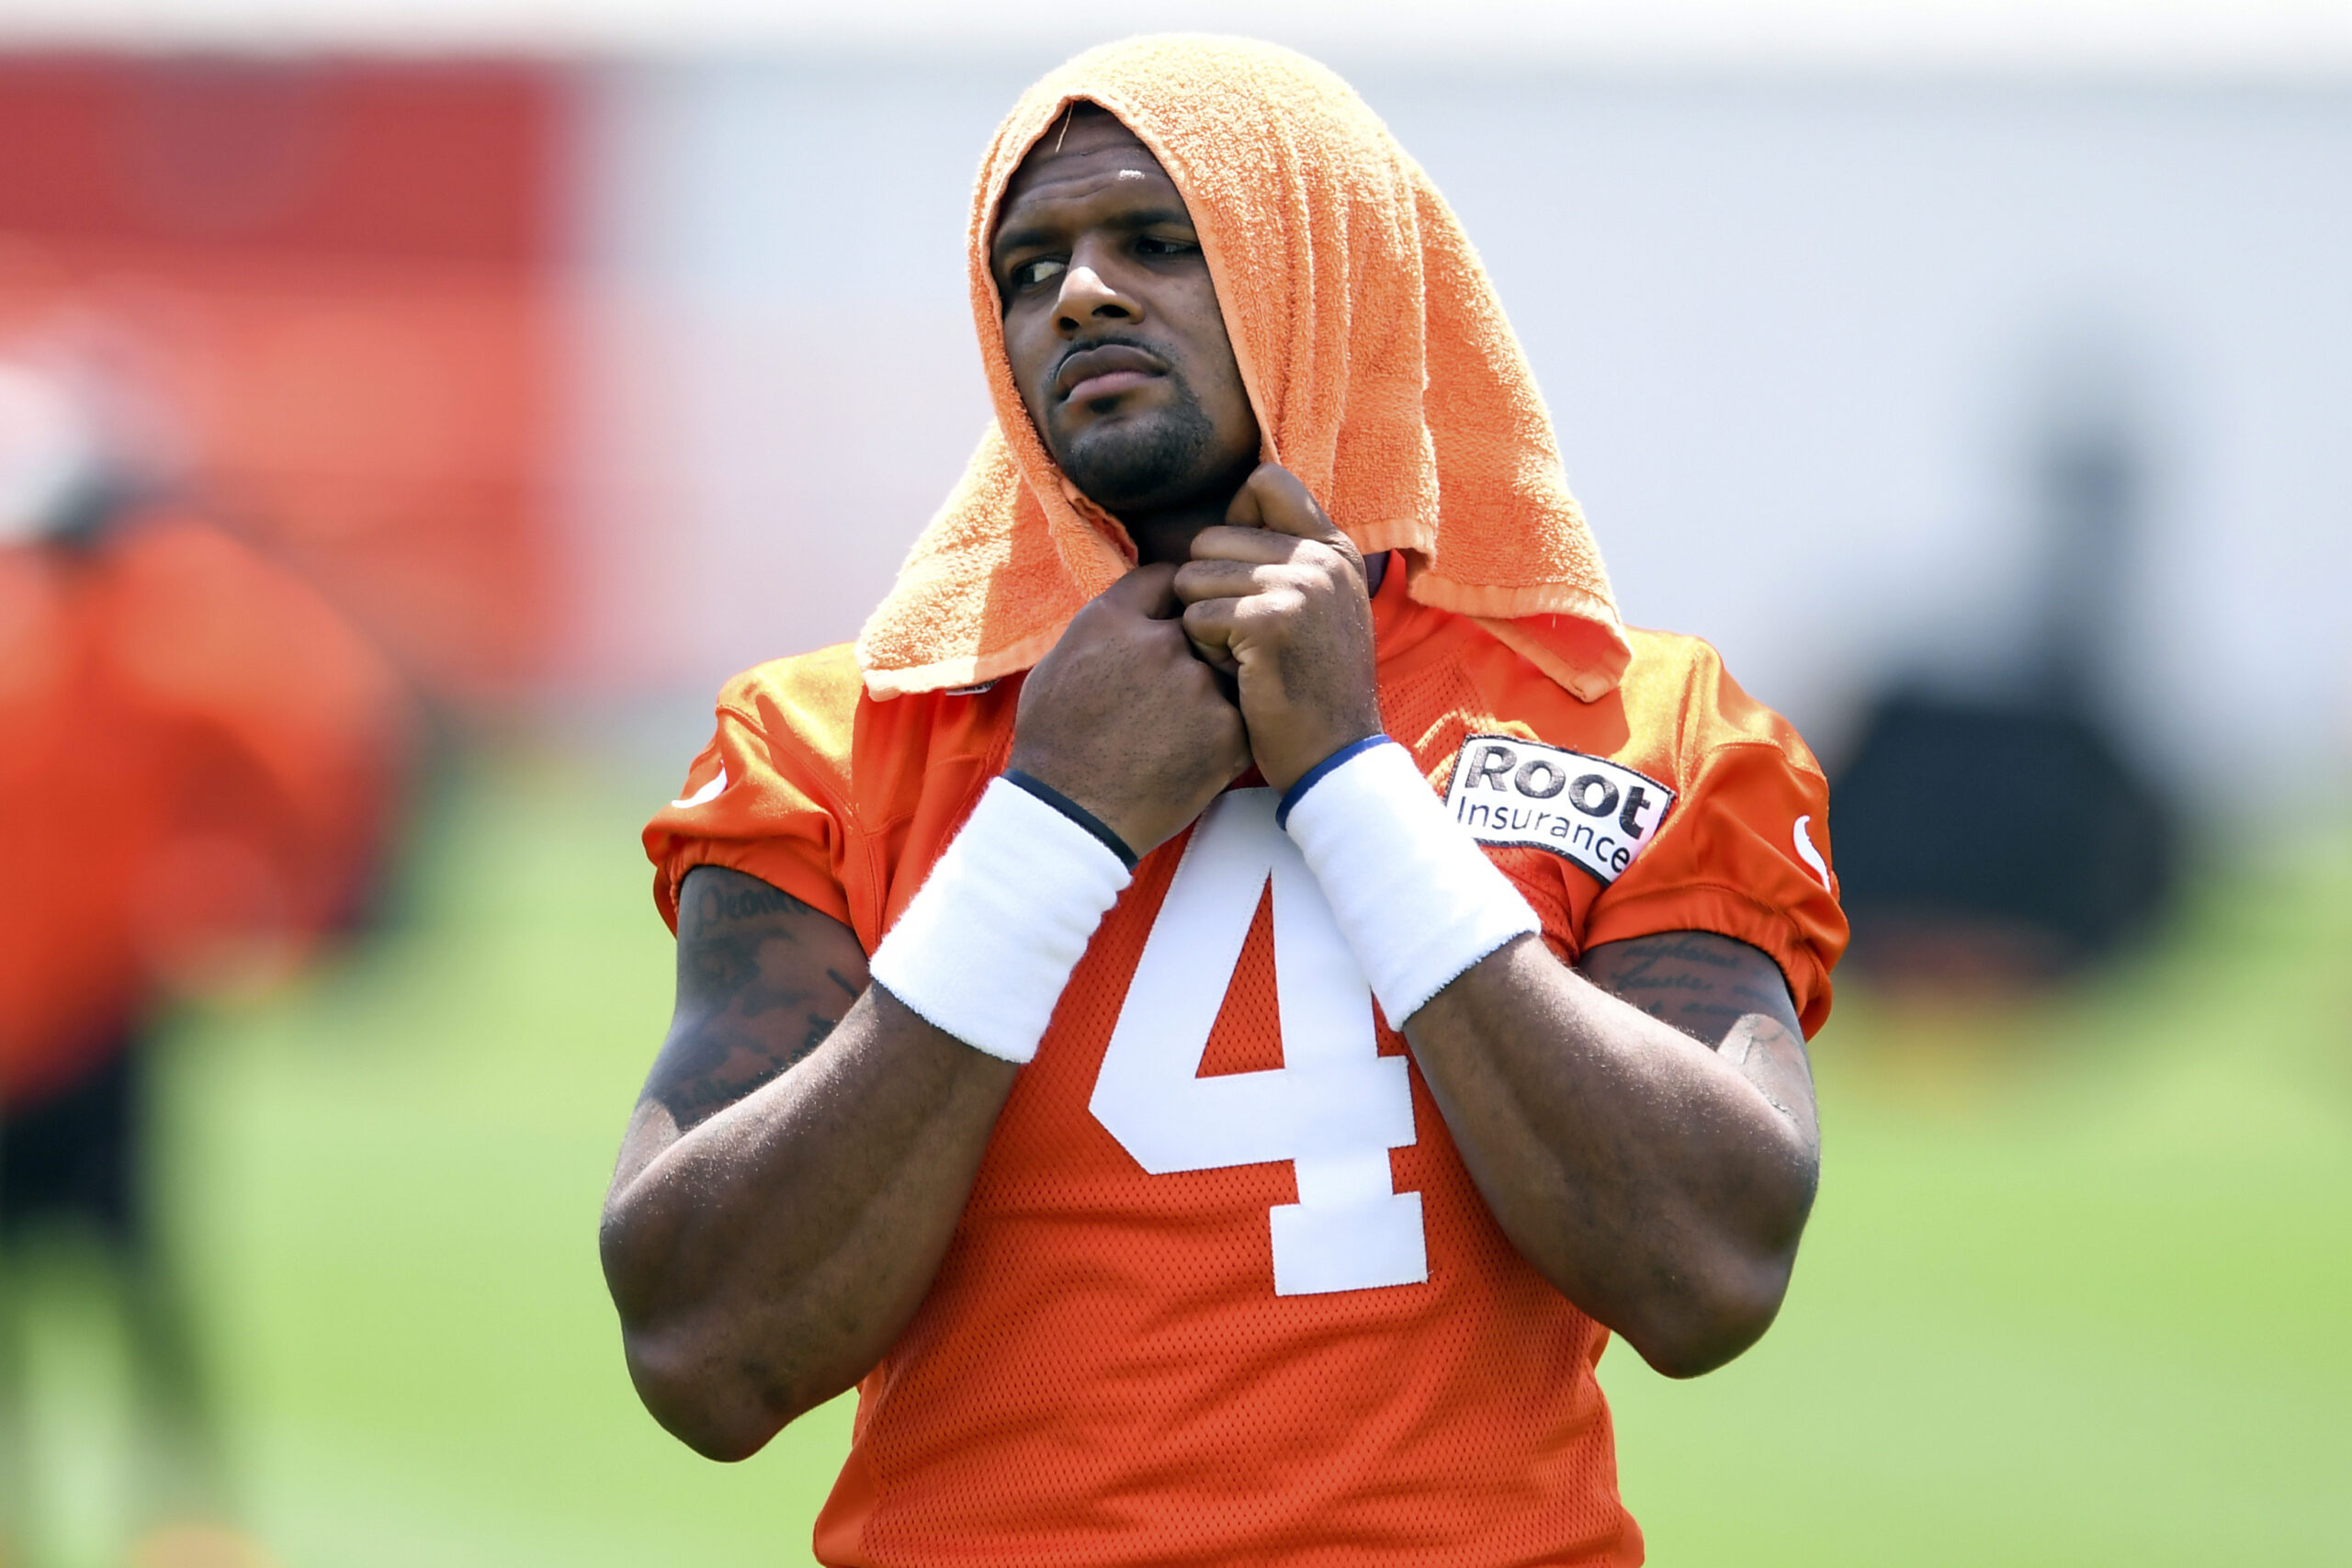 Browns QB Deshaun Watson Suspended for 6 Games